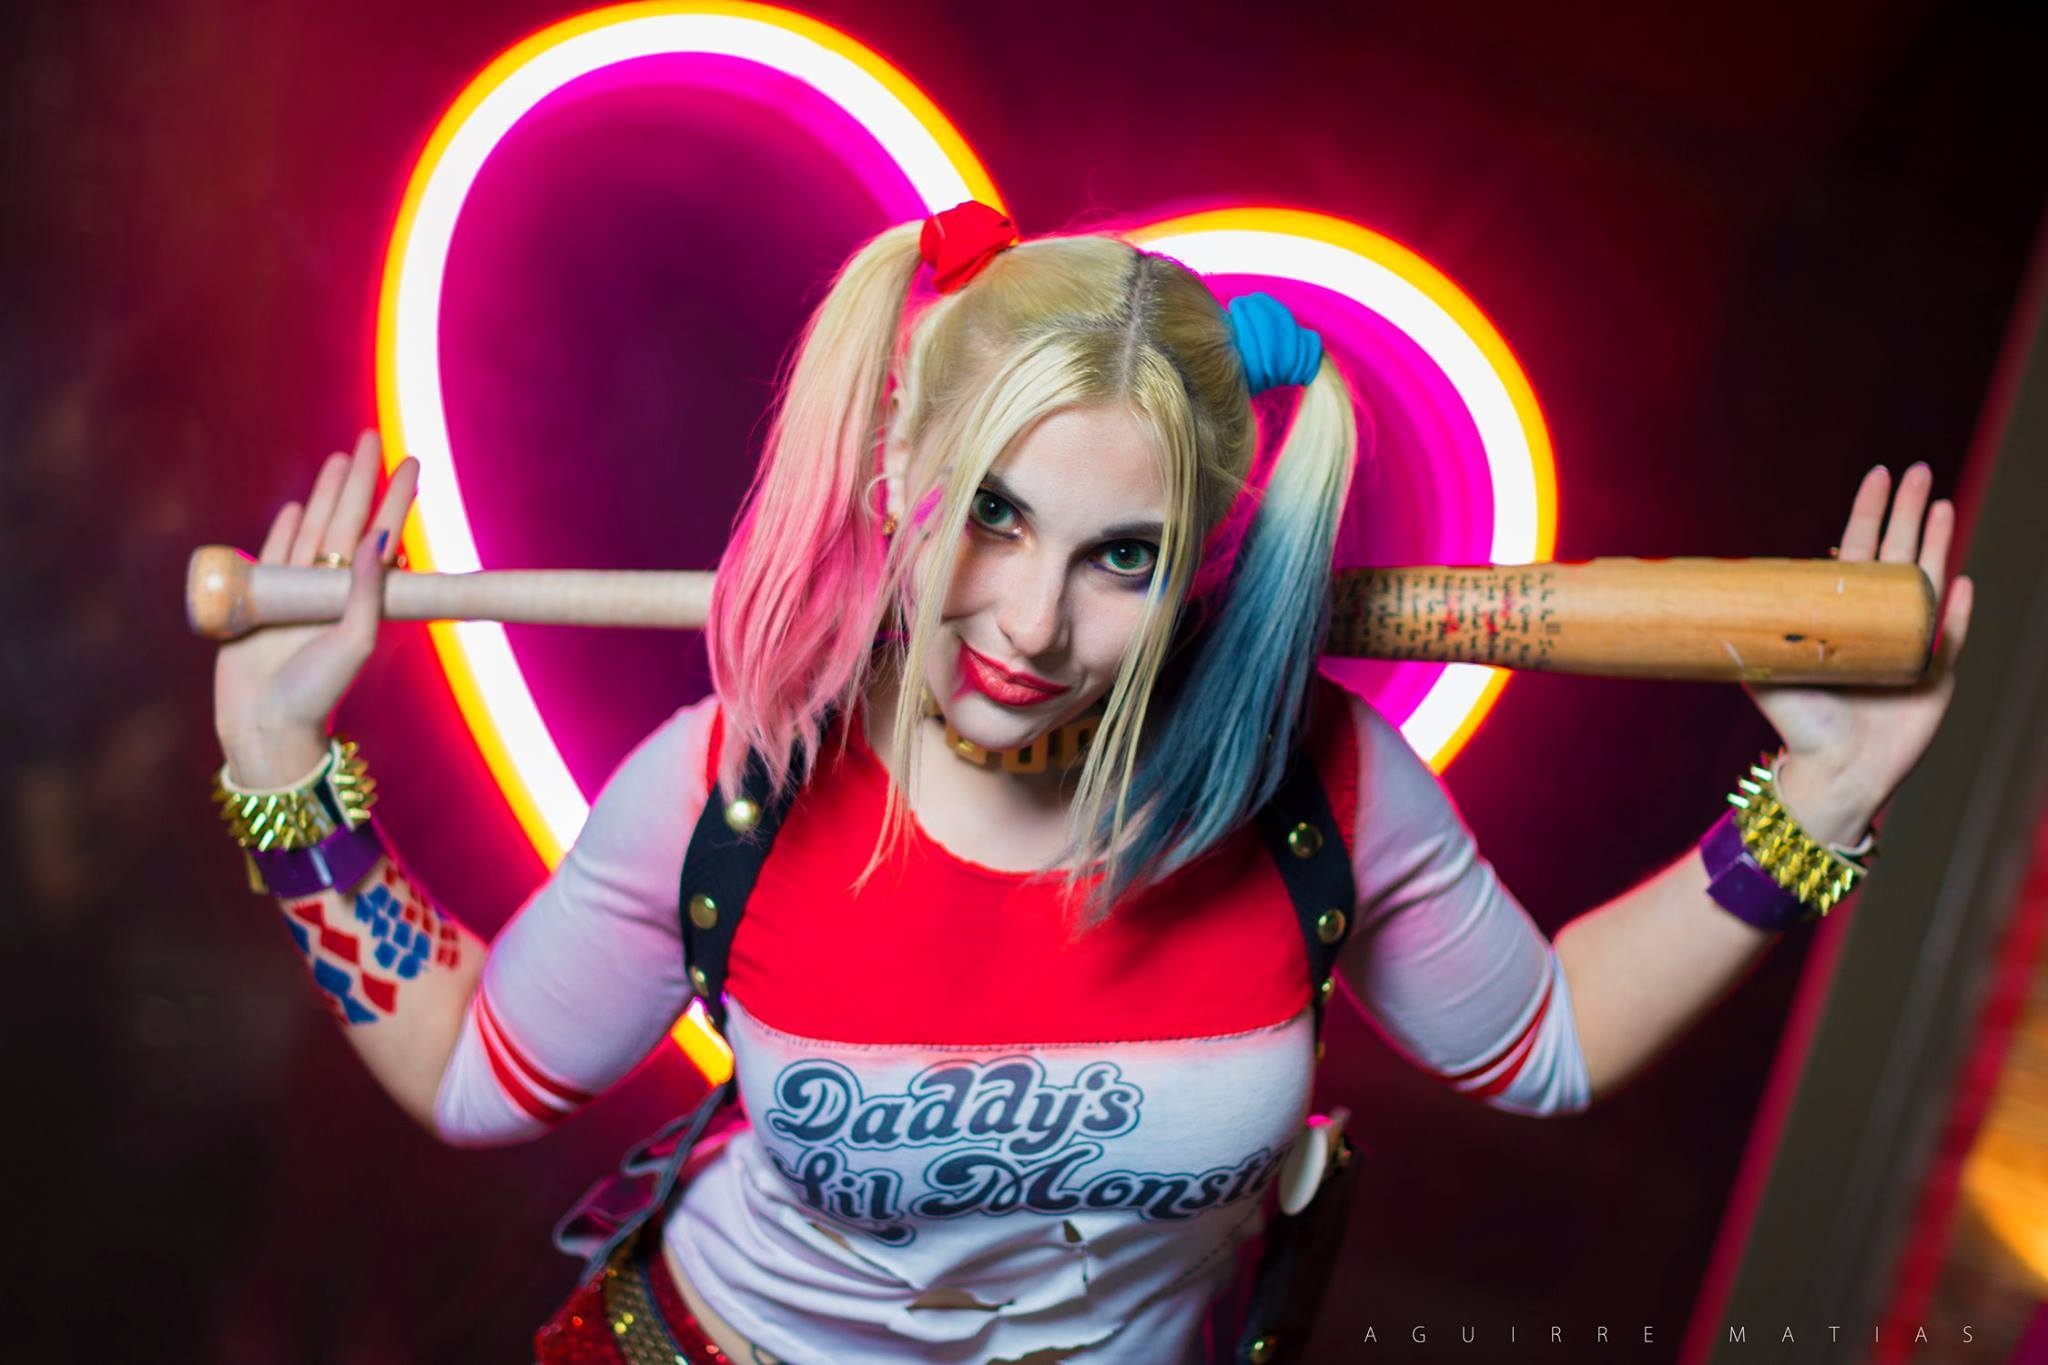 WS’s 7 Deadly Questions CosViewed With Harley Quinn and